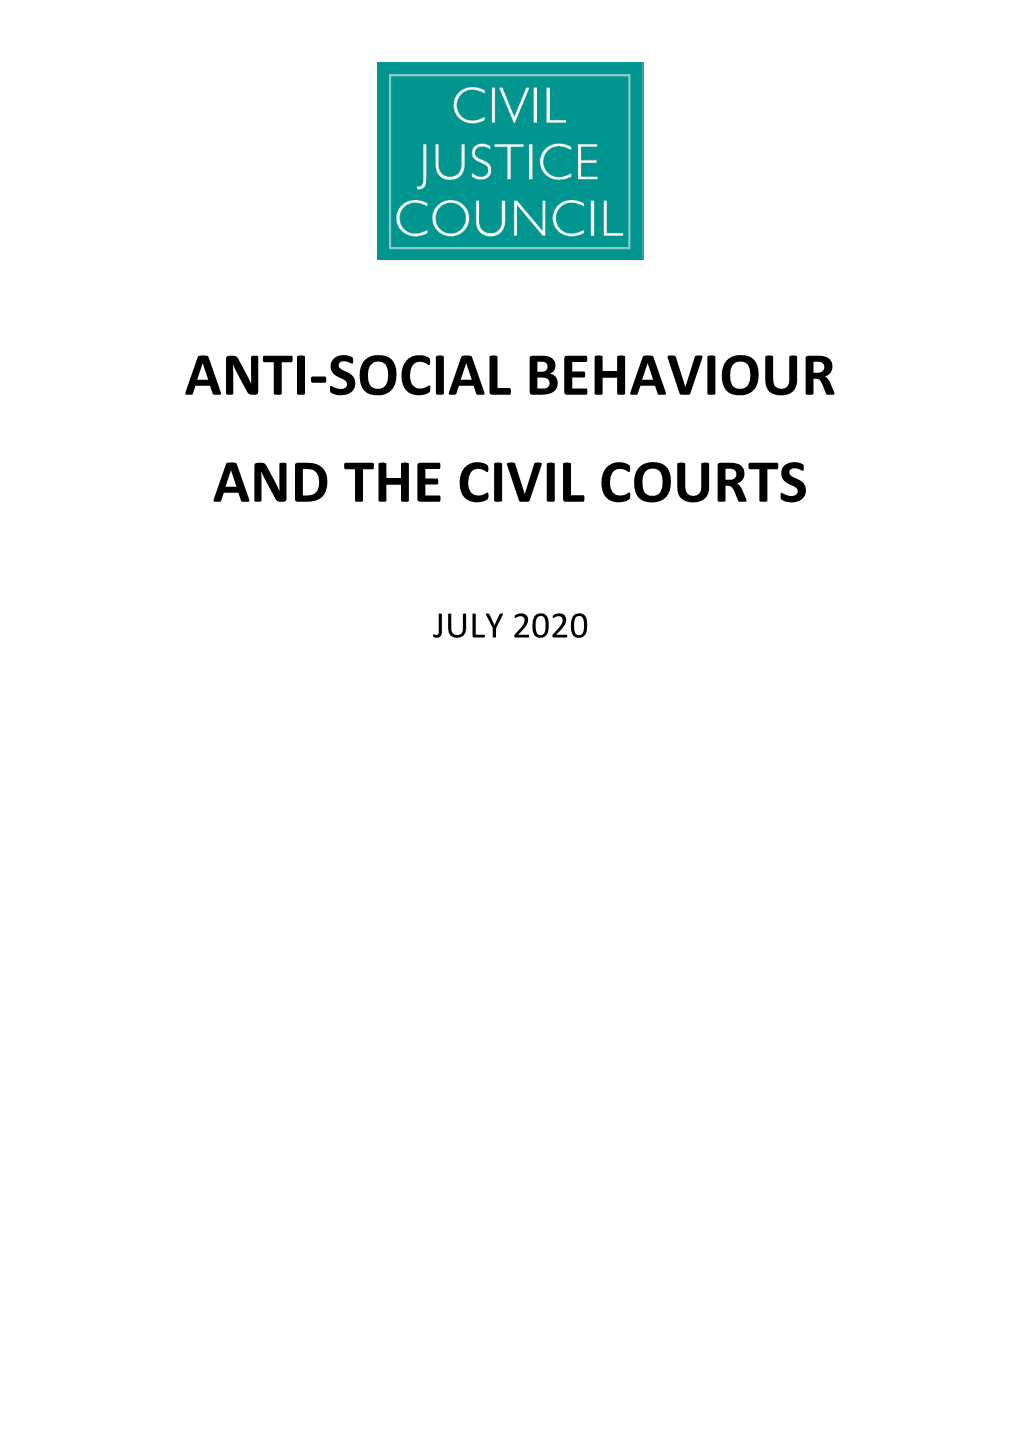 Anti-Social Behaviour and the Civil Courts